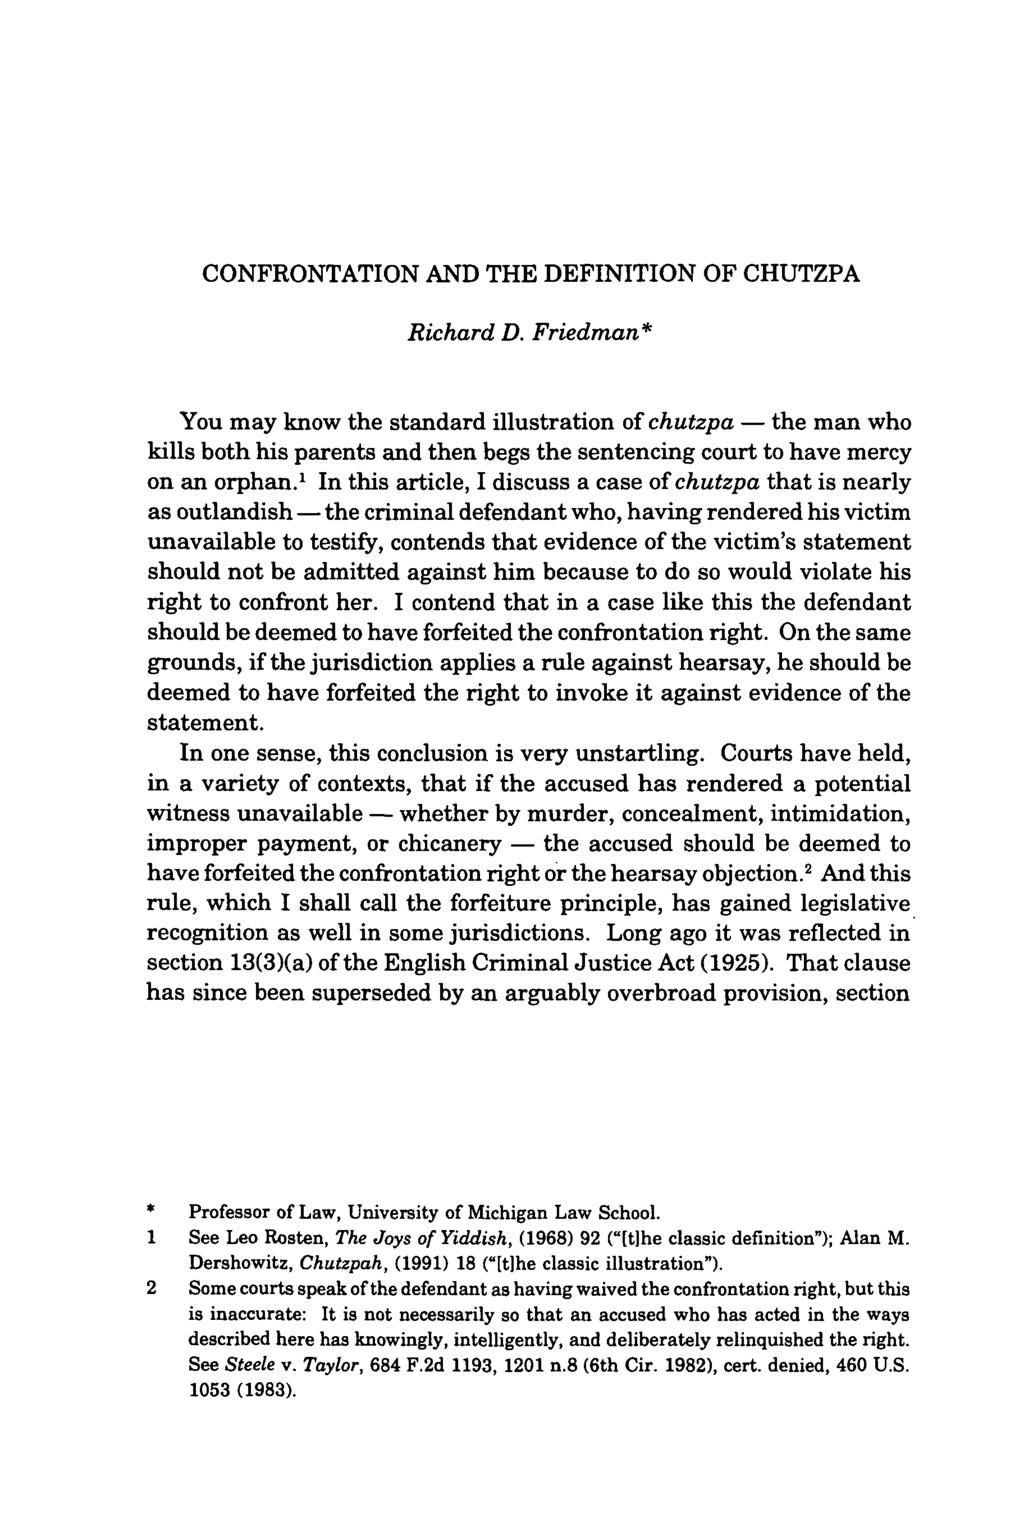 CONFRONTATION AND THE DEFINITION OF CHUTZPA Richard D.